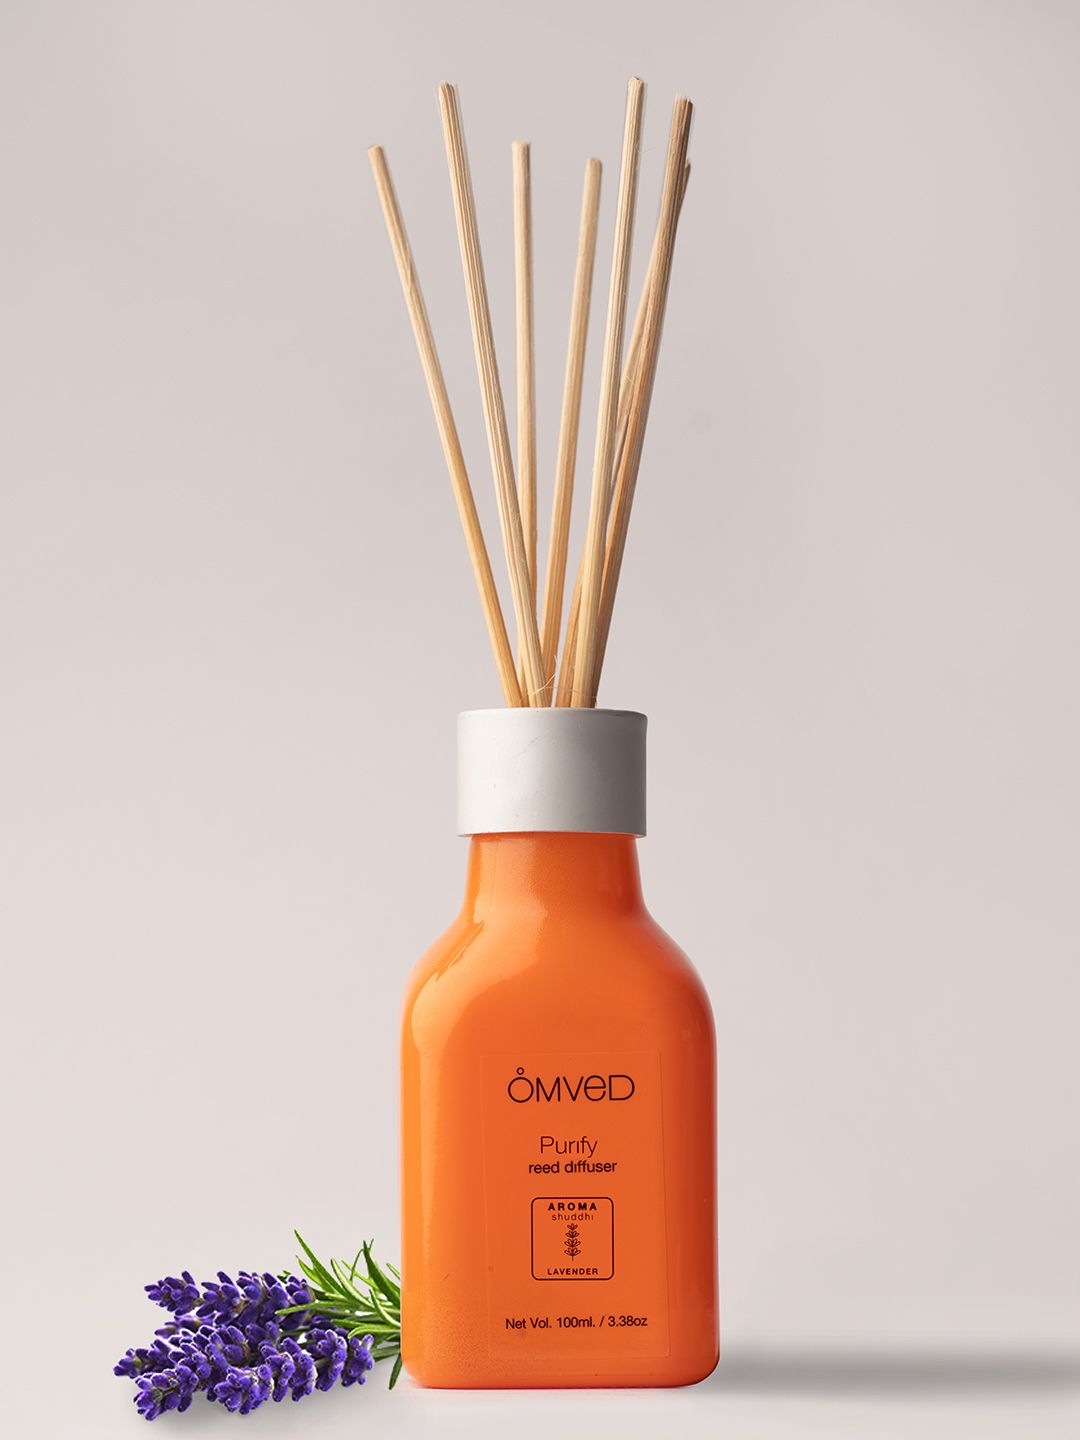 Omved Purify Reed Diffuser 100 ml Price in India